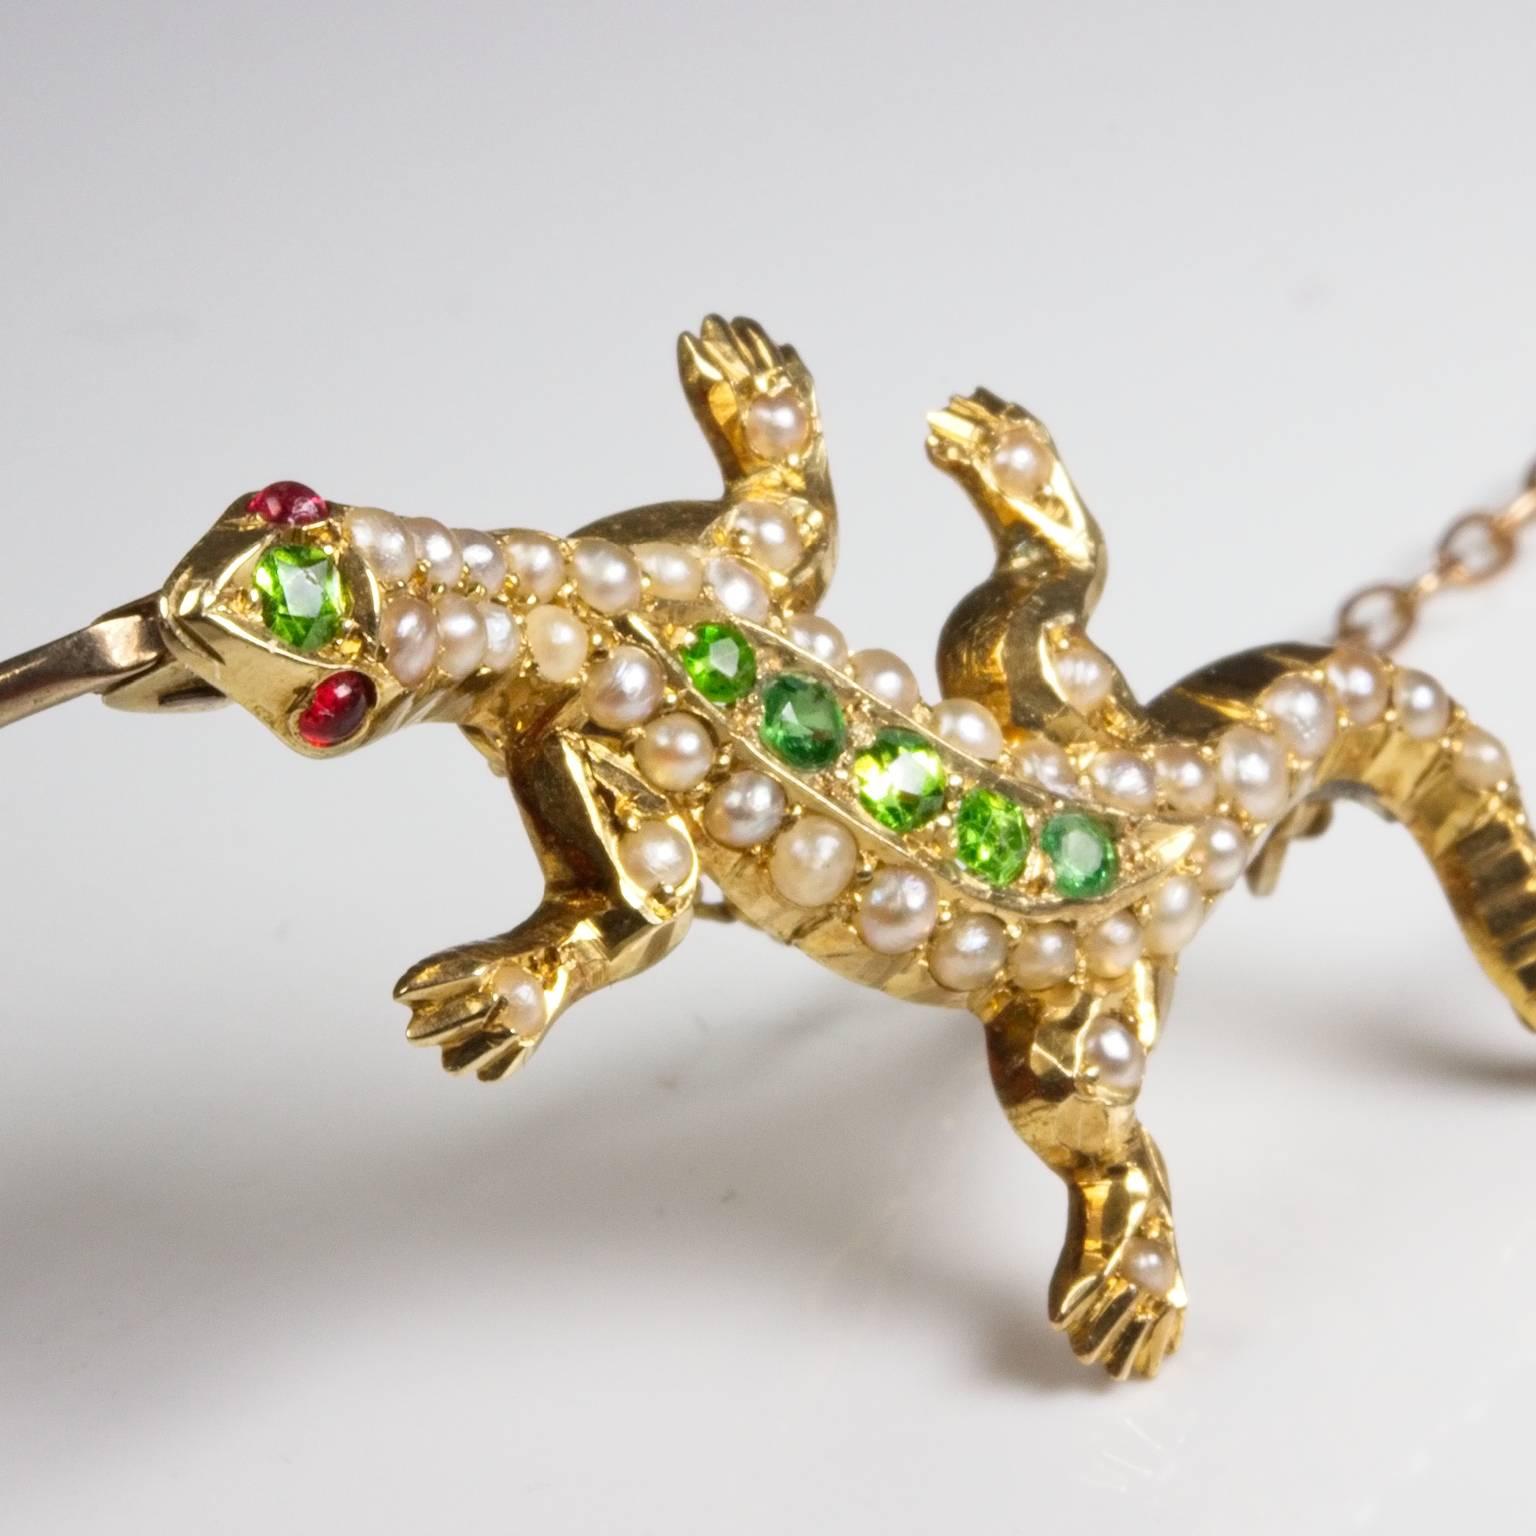 Beautiful lizard brooch by Duggin, Shapere and Co. They were active in Melbourne from 1896-1928. Ruby eyes and seed pearls with demantoid garnets all in 15ct gold. With safety chain. 4cm long. Nicely marked with their anchor. This item is unique and